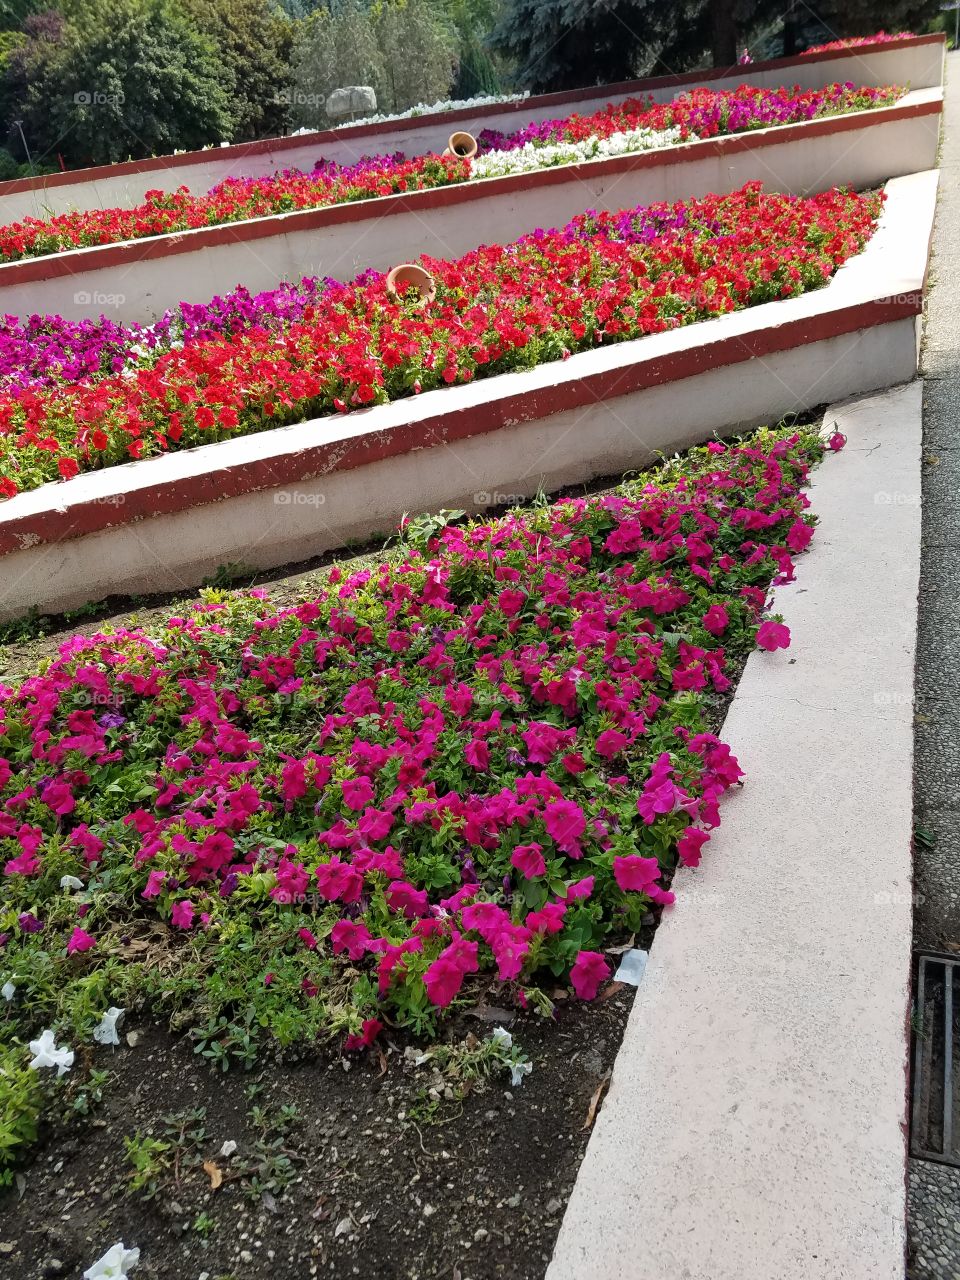 rows of different colored flowers